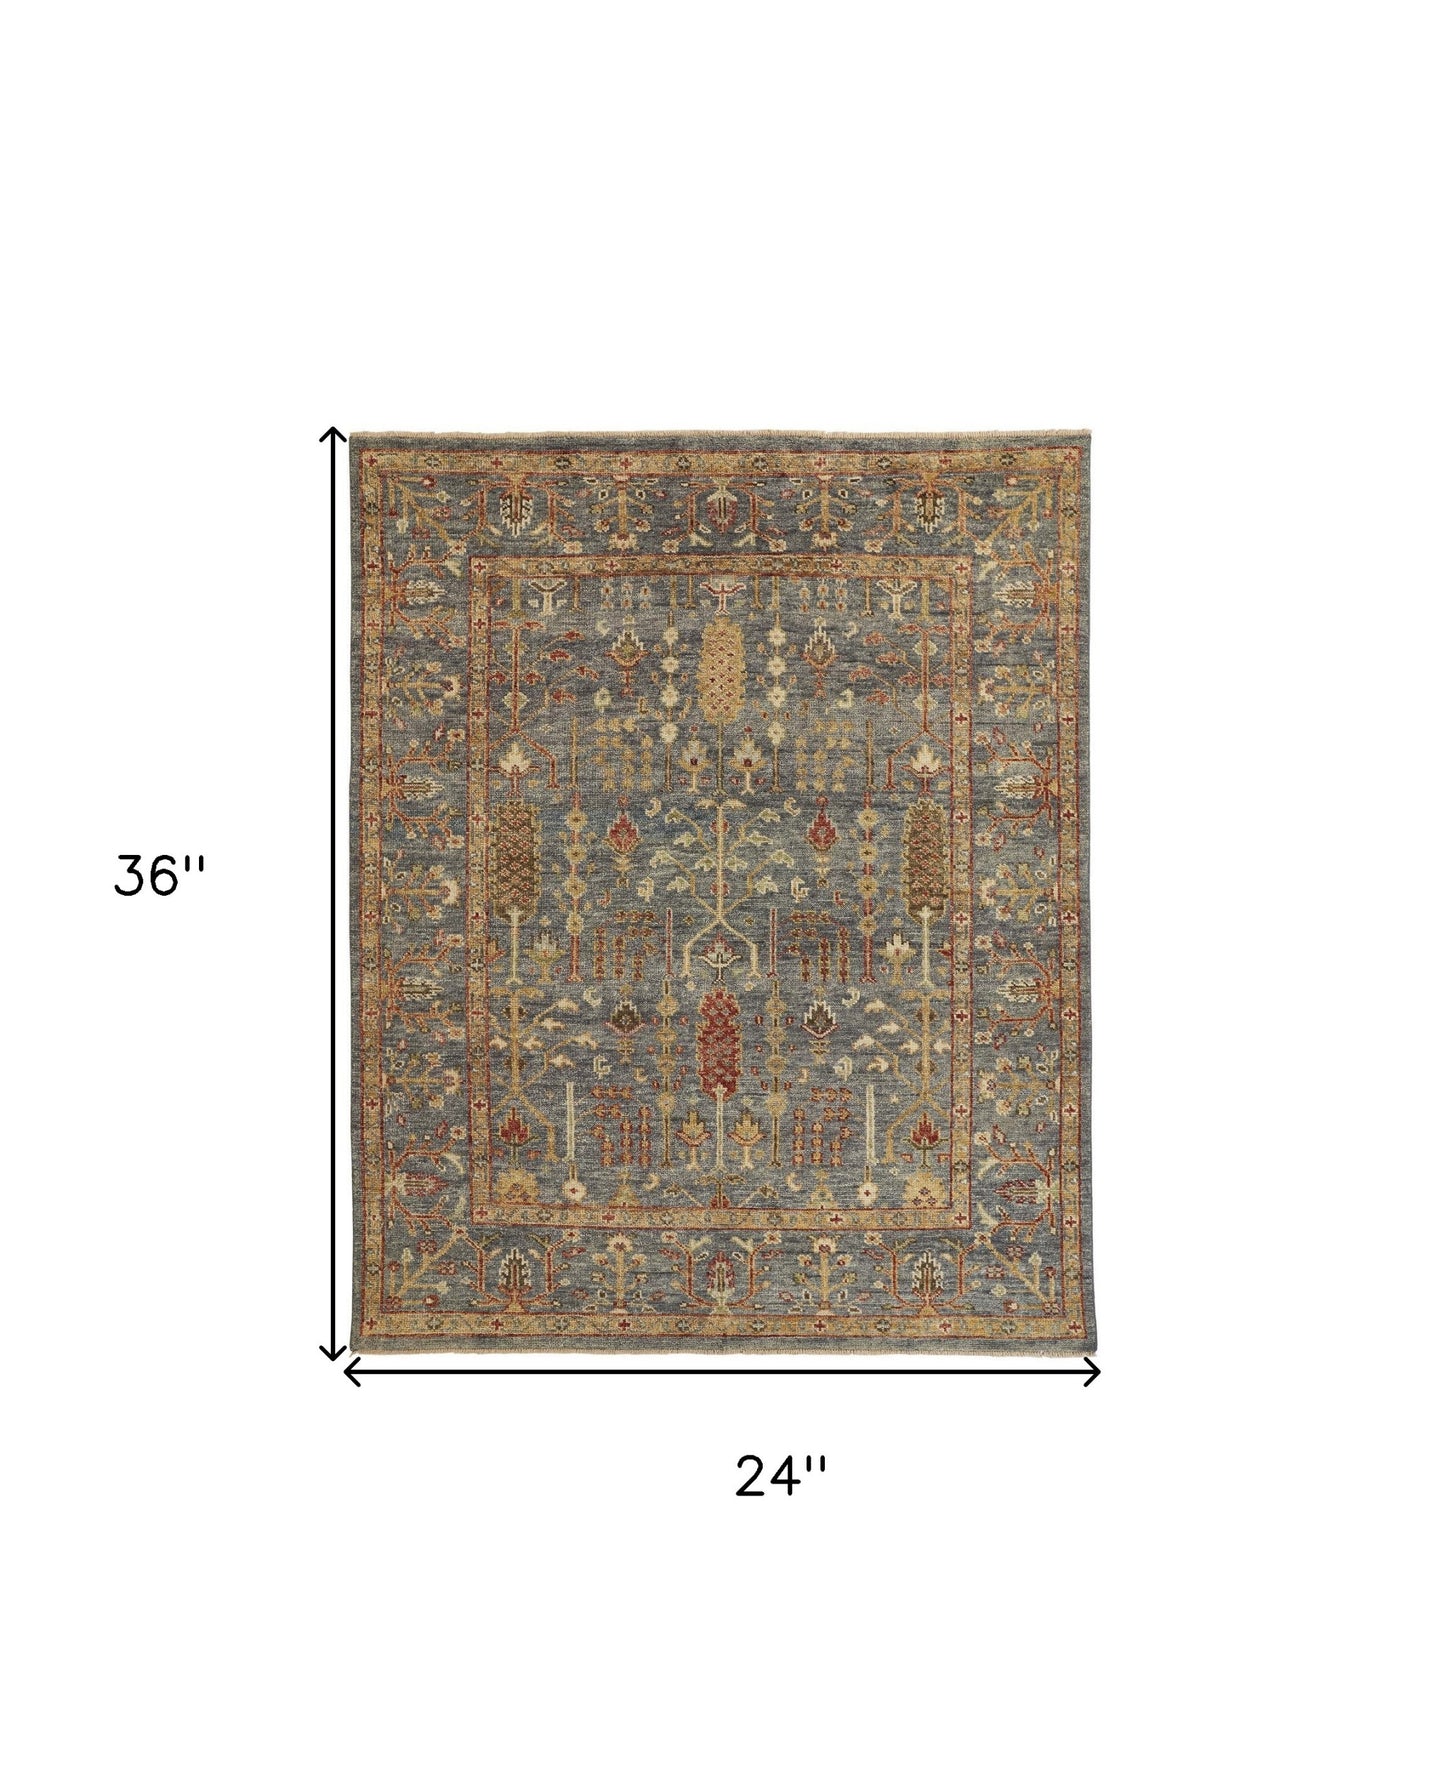 12' X 15' Gray Gold And Red Wool Floral Hand Knotted Stain Resistant Area Rug With Fringe